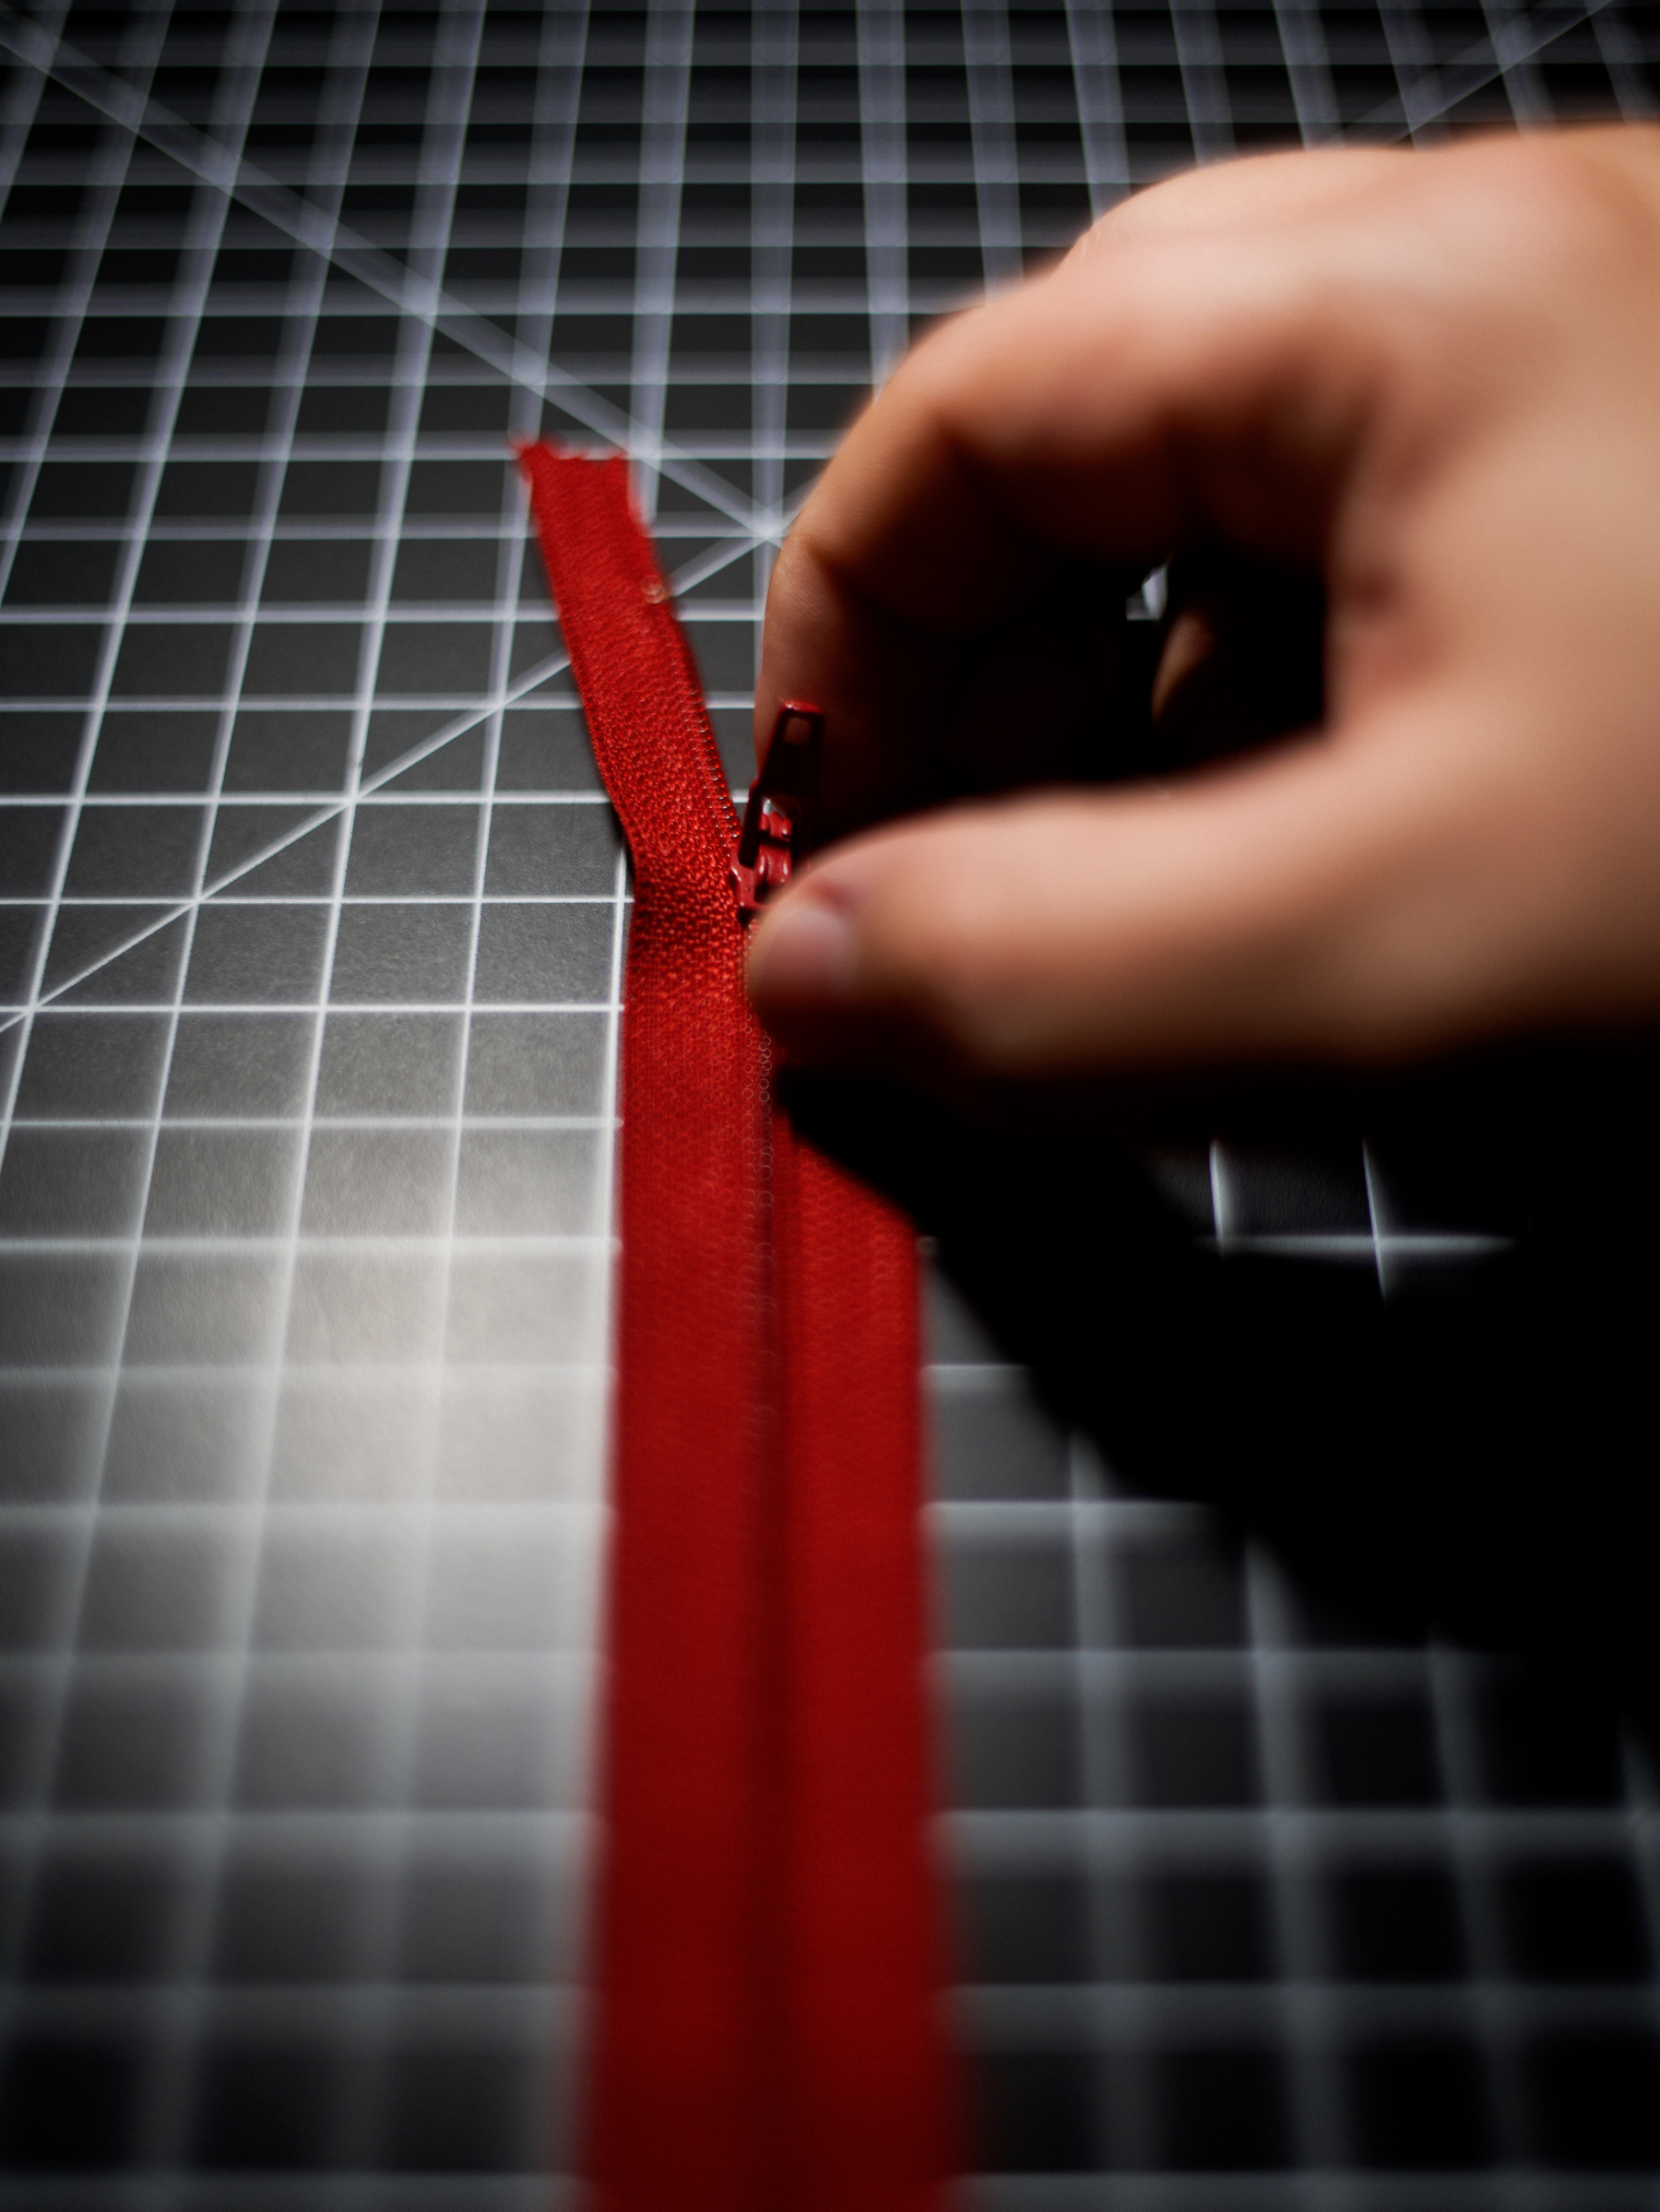 A red zipper being unzipped by a hand above a black and white grid